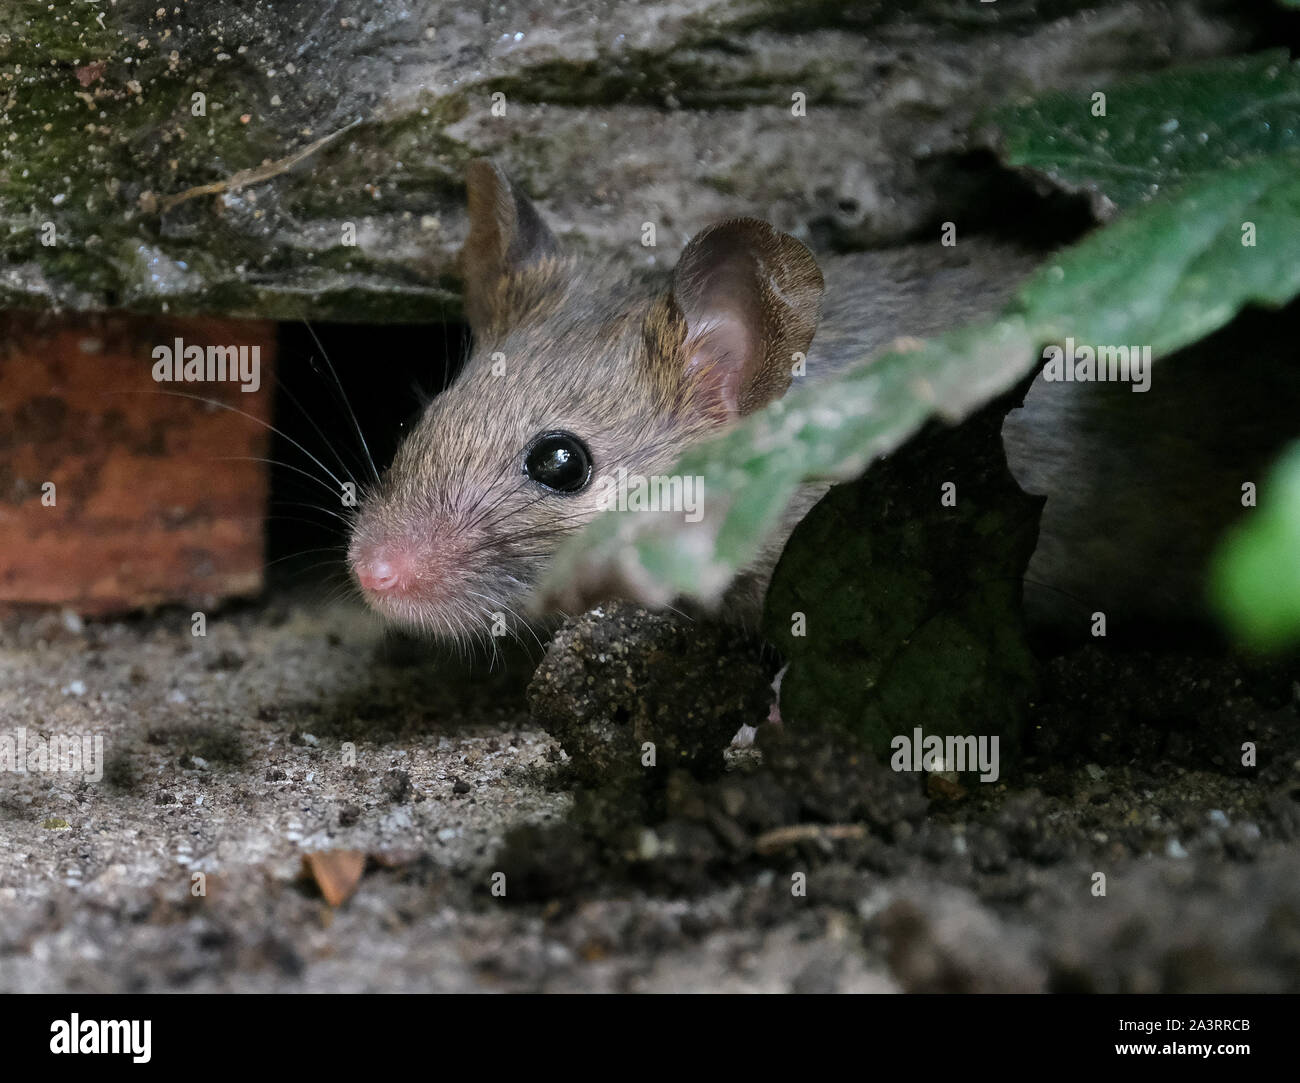 Mice searching for food in an urban garden. Stock Photo